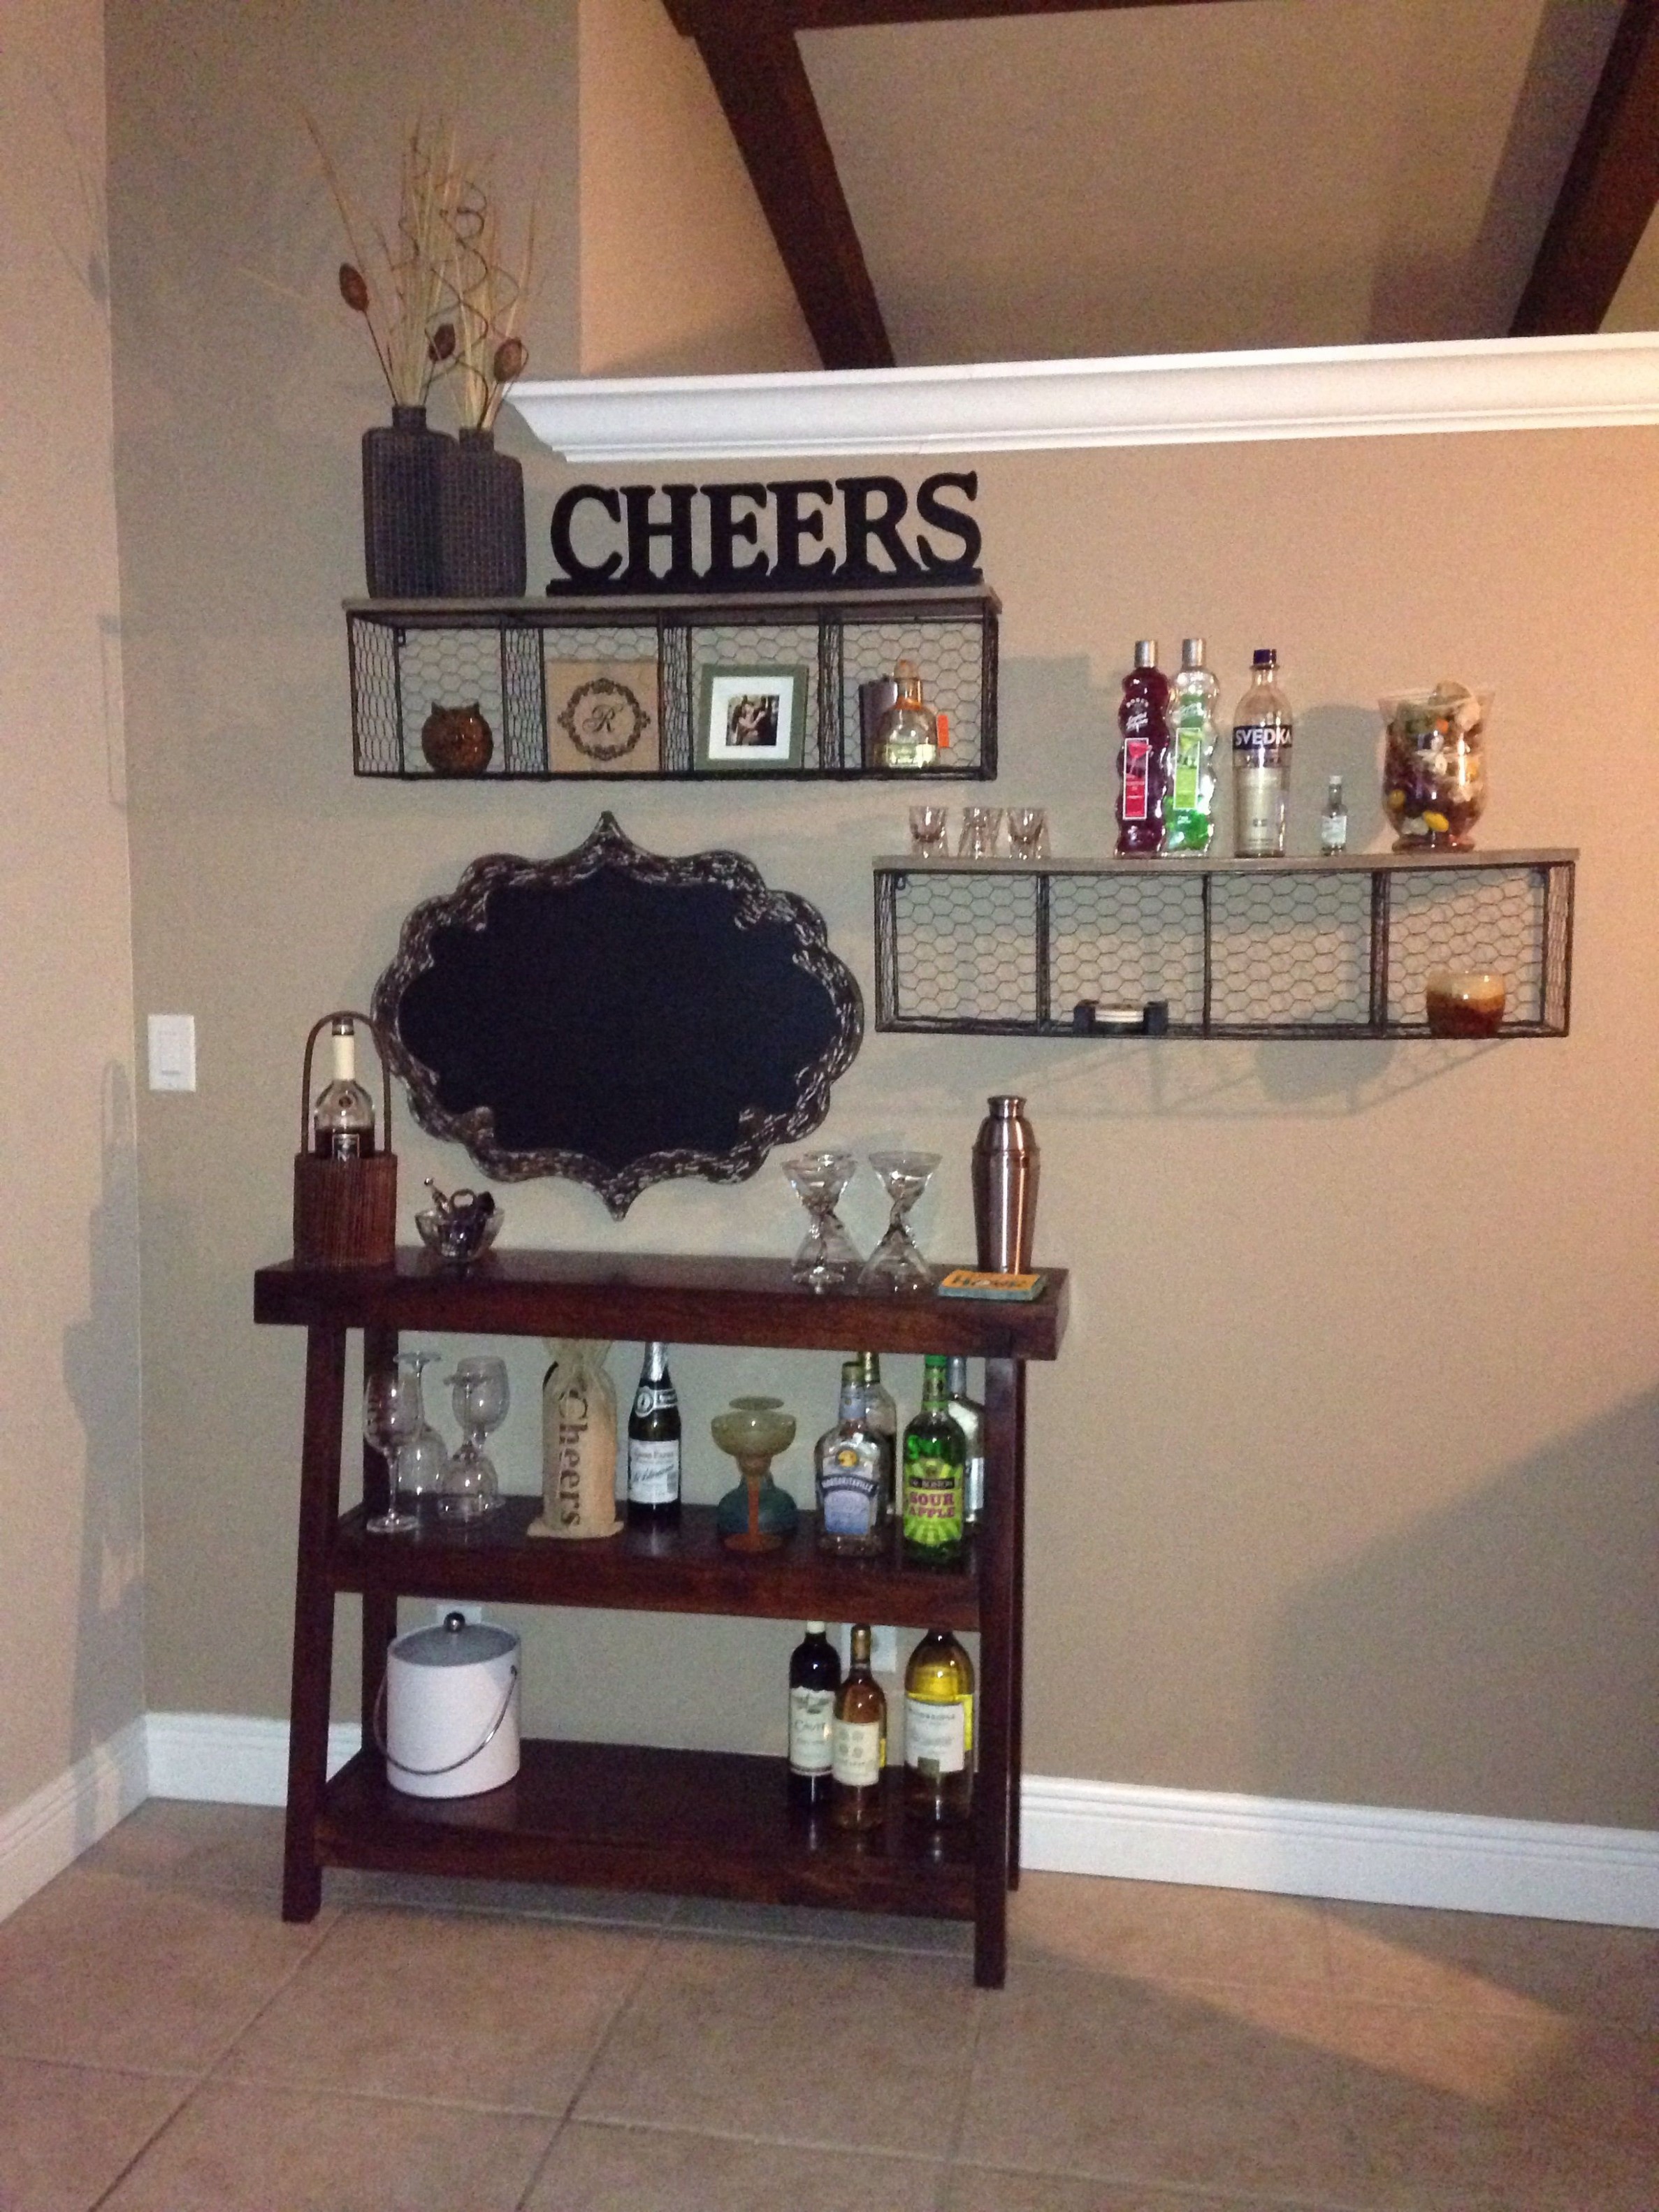 At Home Mini Bar: Items From Hobby Lobby, Home Goods, And ..